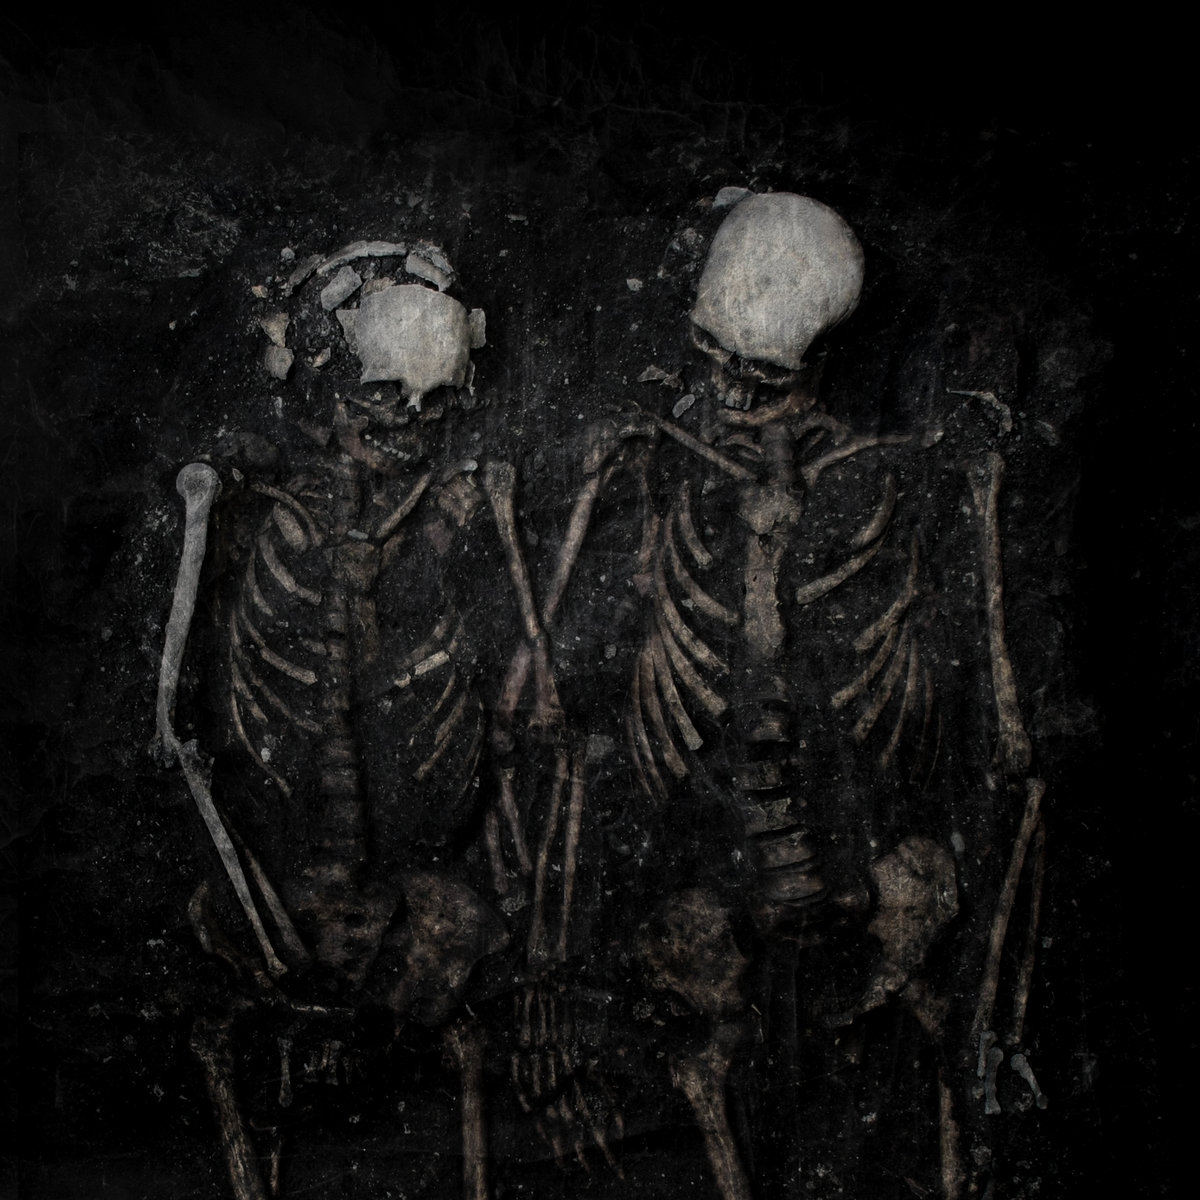 The Phonometrician coiste bodhar album art - photo of two skeletons unearthed from the ground. The picture is very dark and ominous